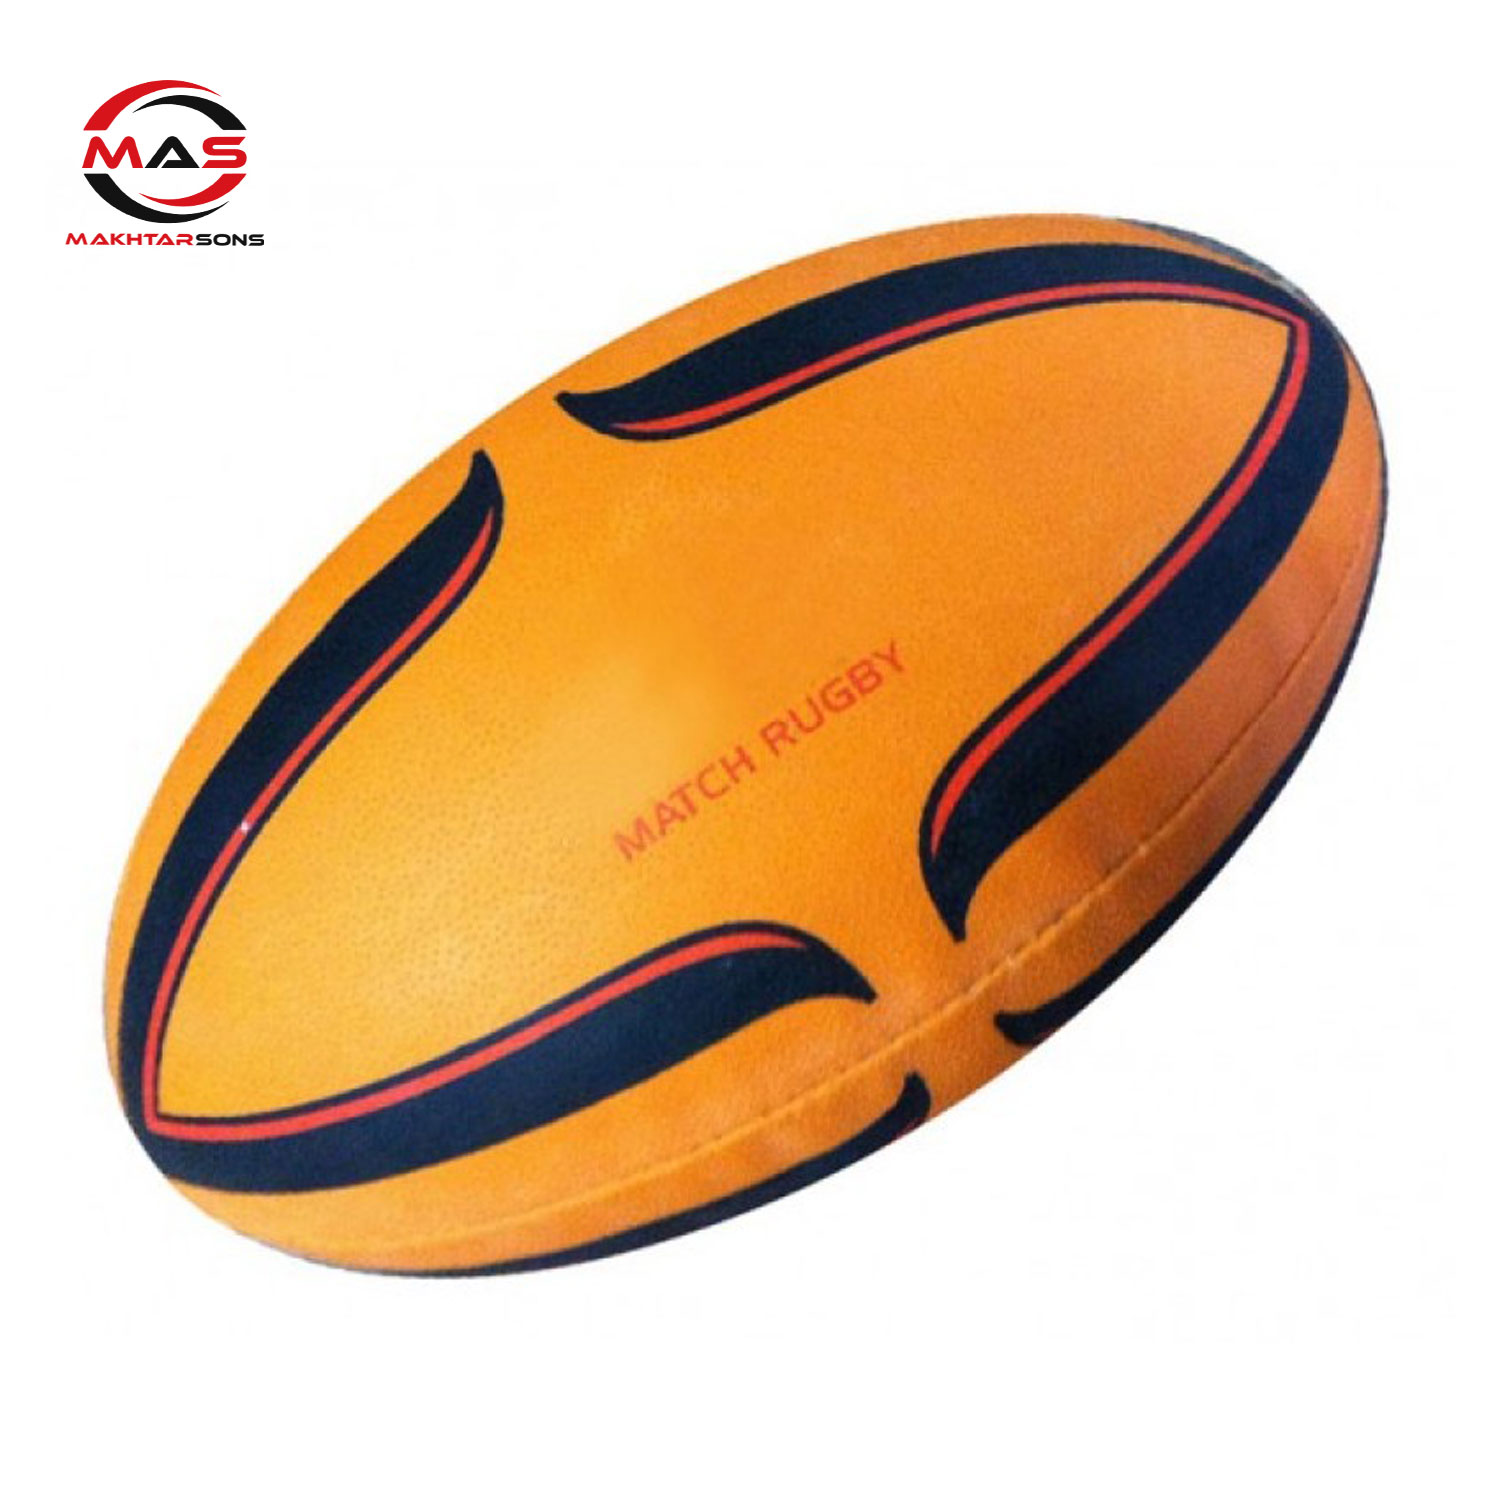 RUGBY BALL | MAS 425